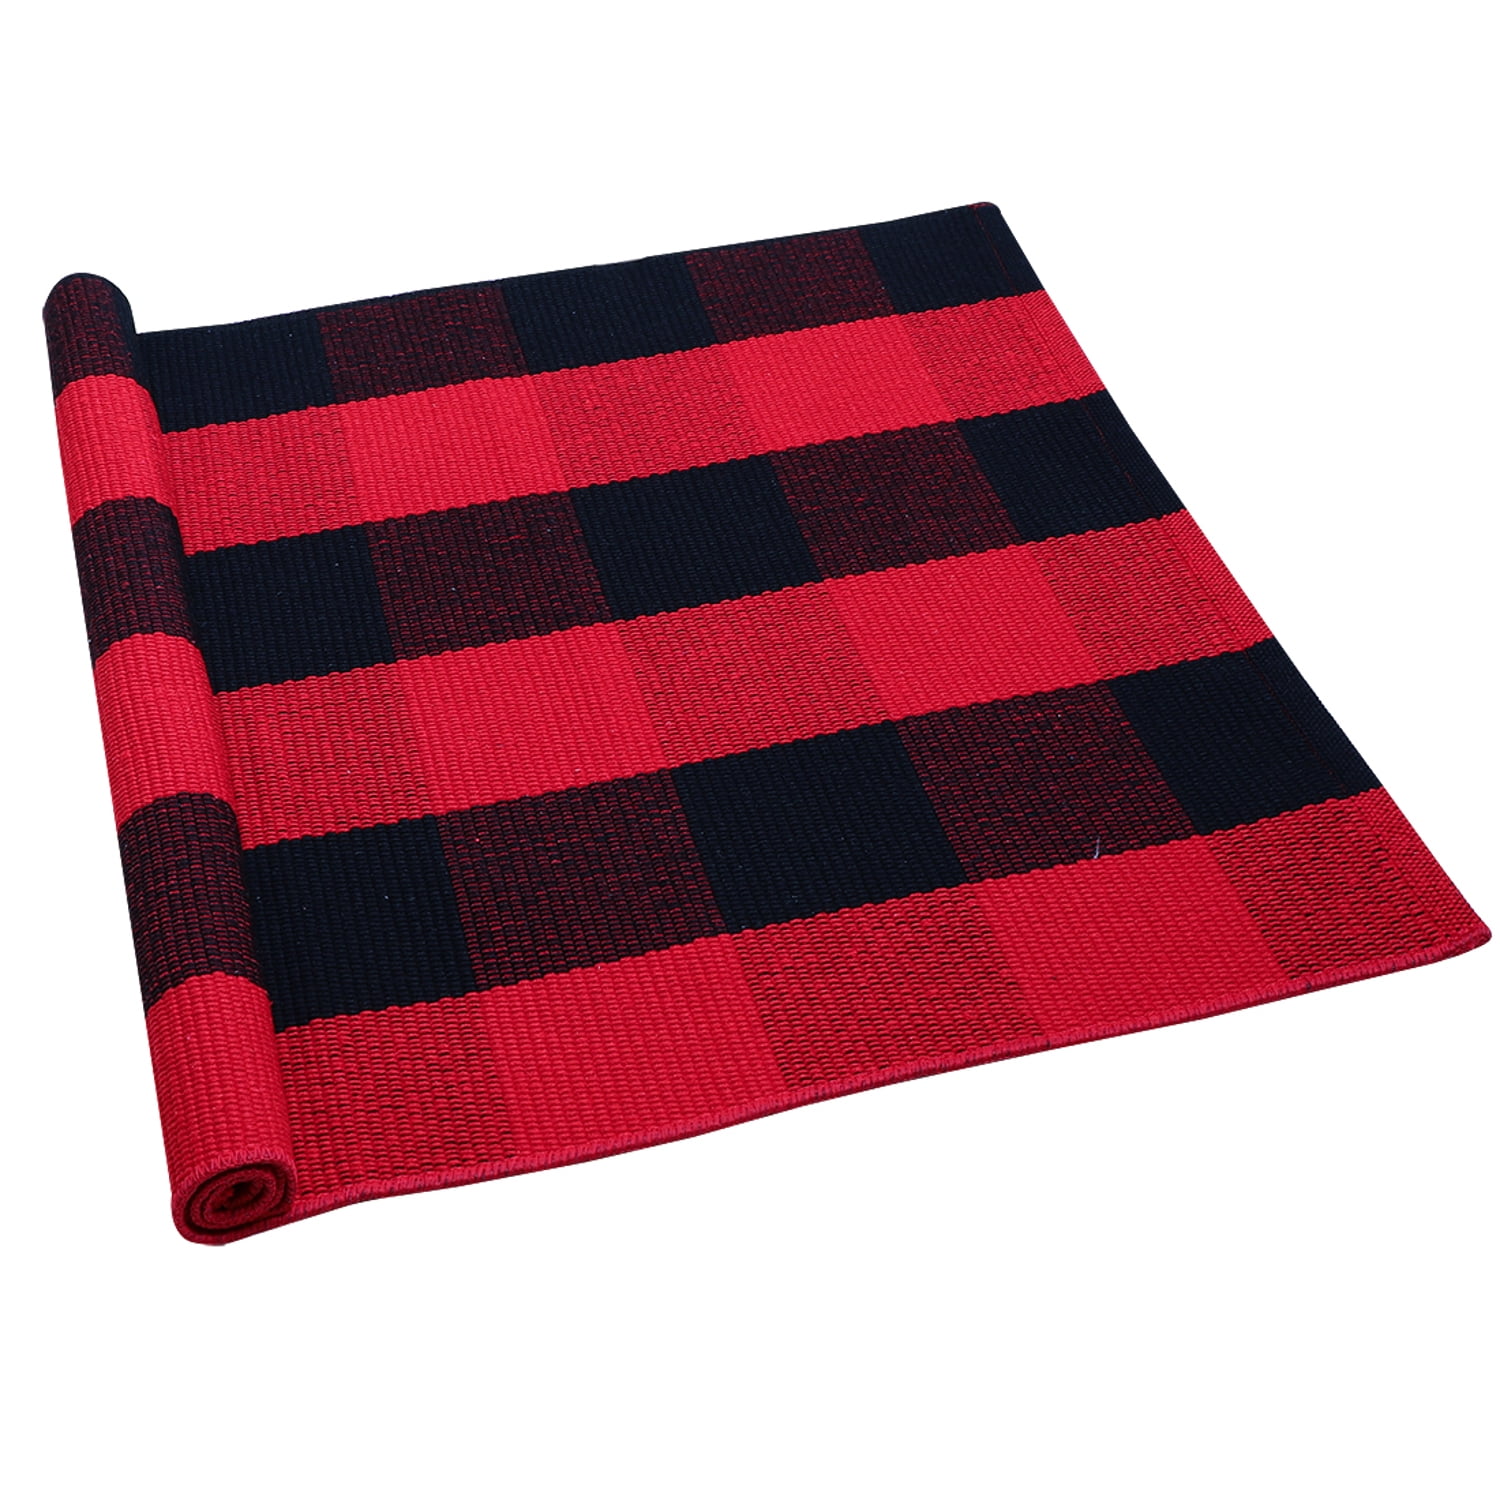 17x48+17x24, Black&Red Carvapet 2 Pieces Buffalo Plaid Check Rug Set Water Absorb Microfiber Non-Slip Kitchen Rug Bathroom Mat Checkered Doormat Carpet for Laundry